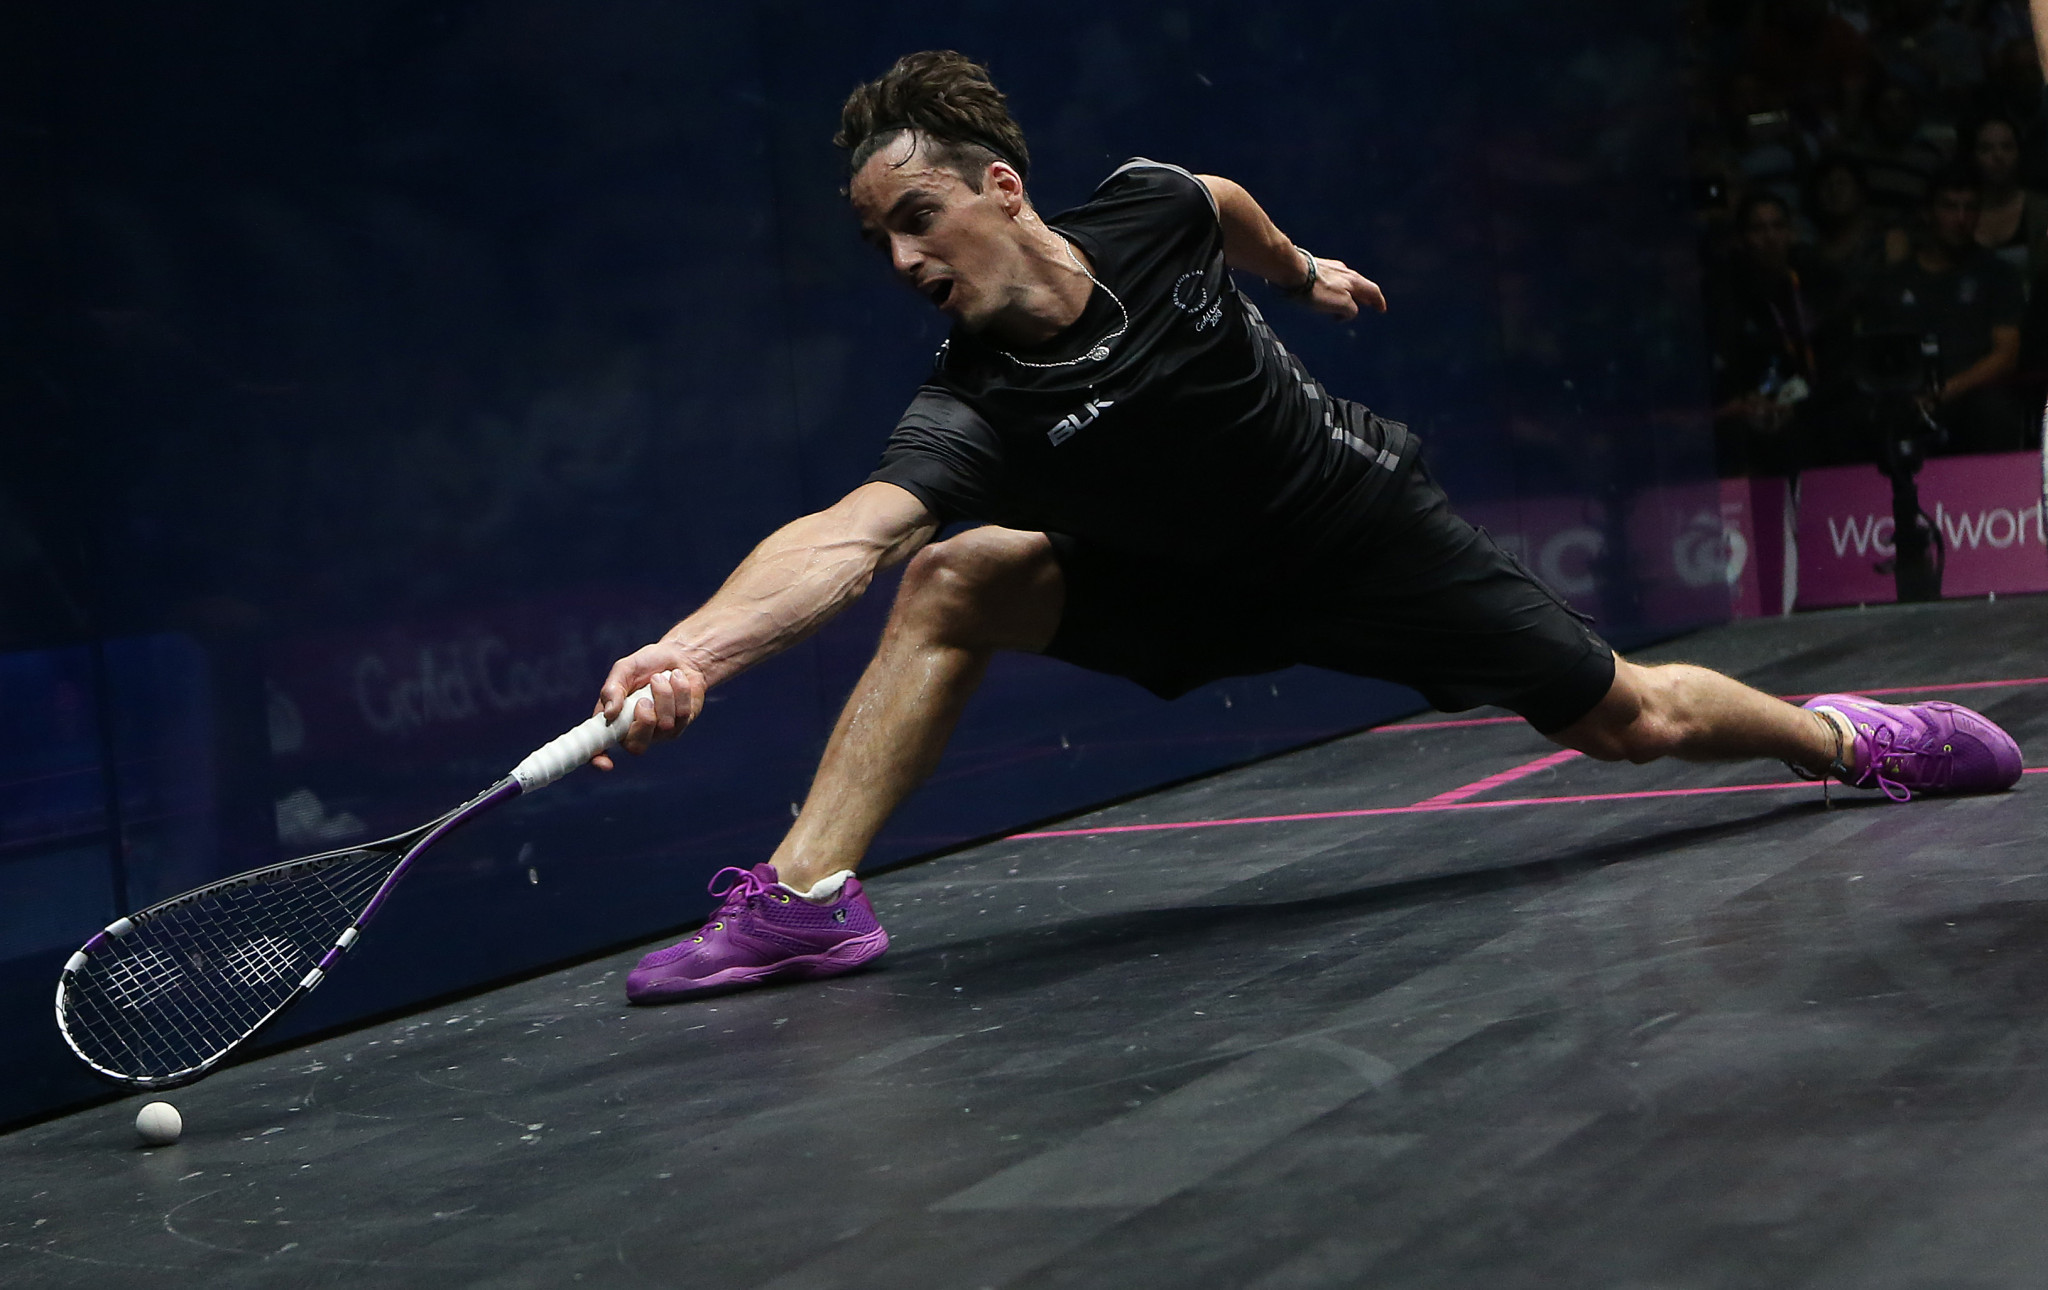 Coll to face Makin in Canary Wharf Classic quarter-finals after easy wins